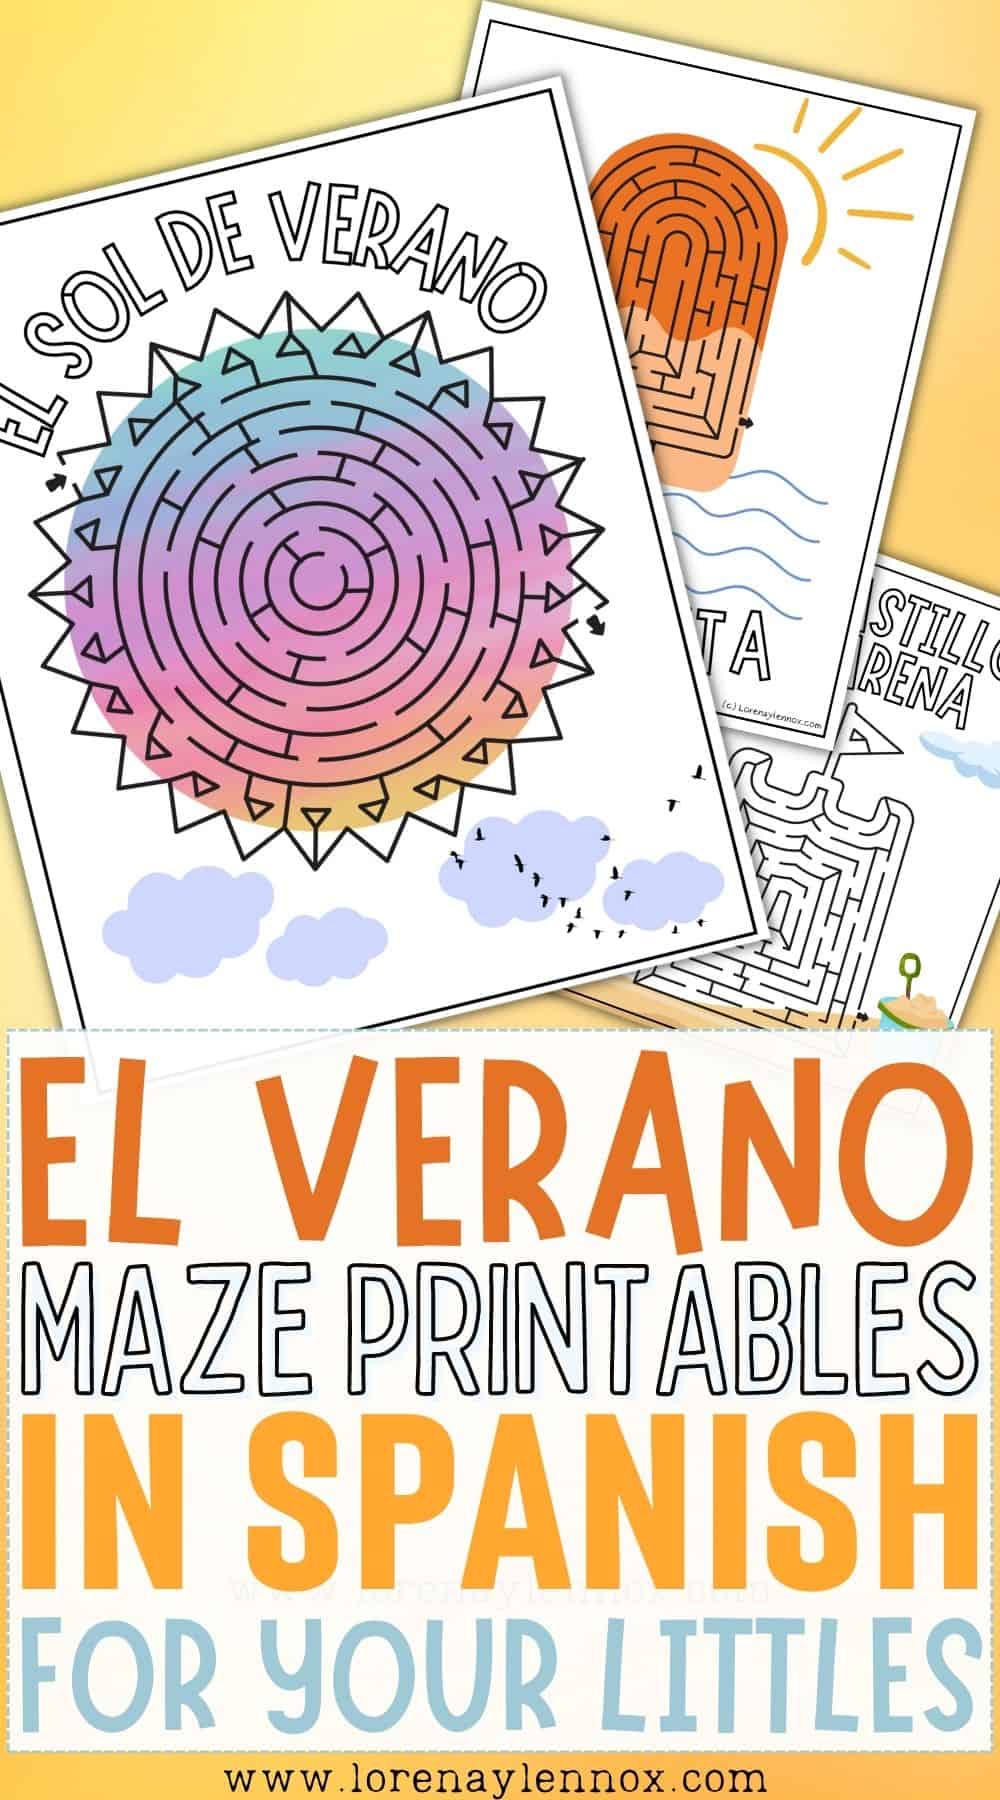 El Verano Maze Printables in Spanish for Your Littles